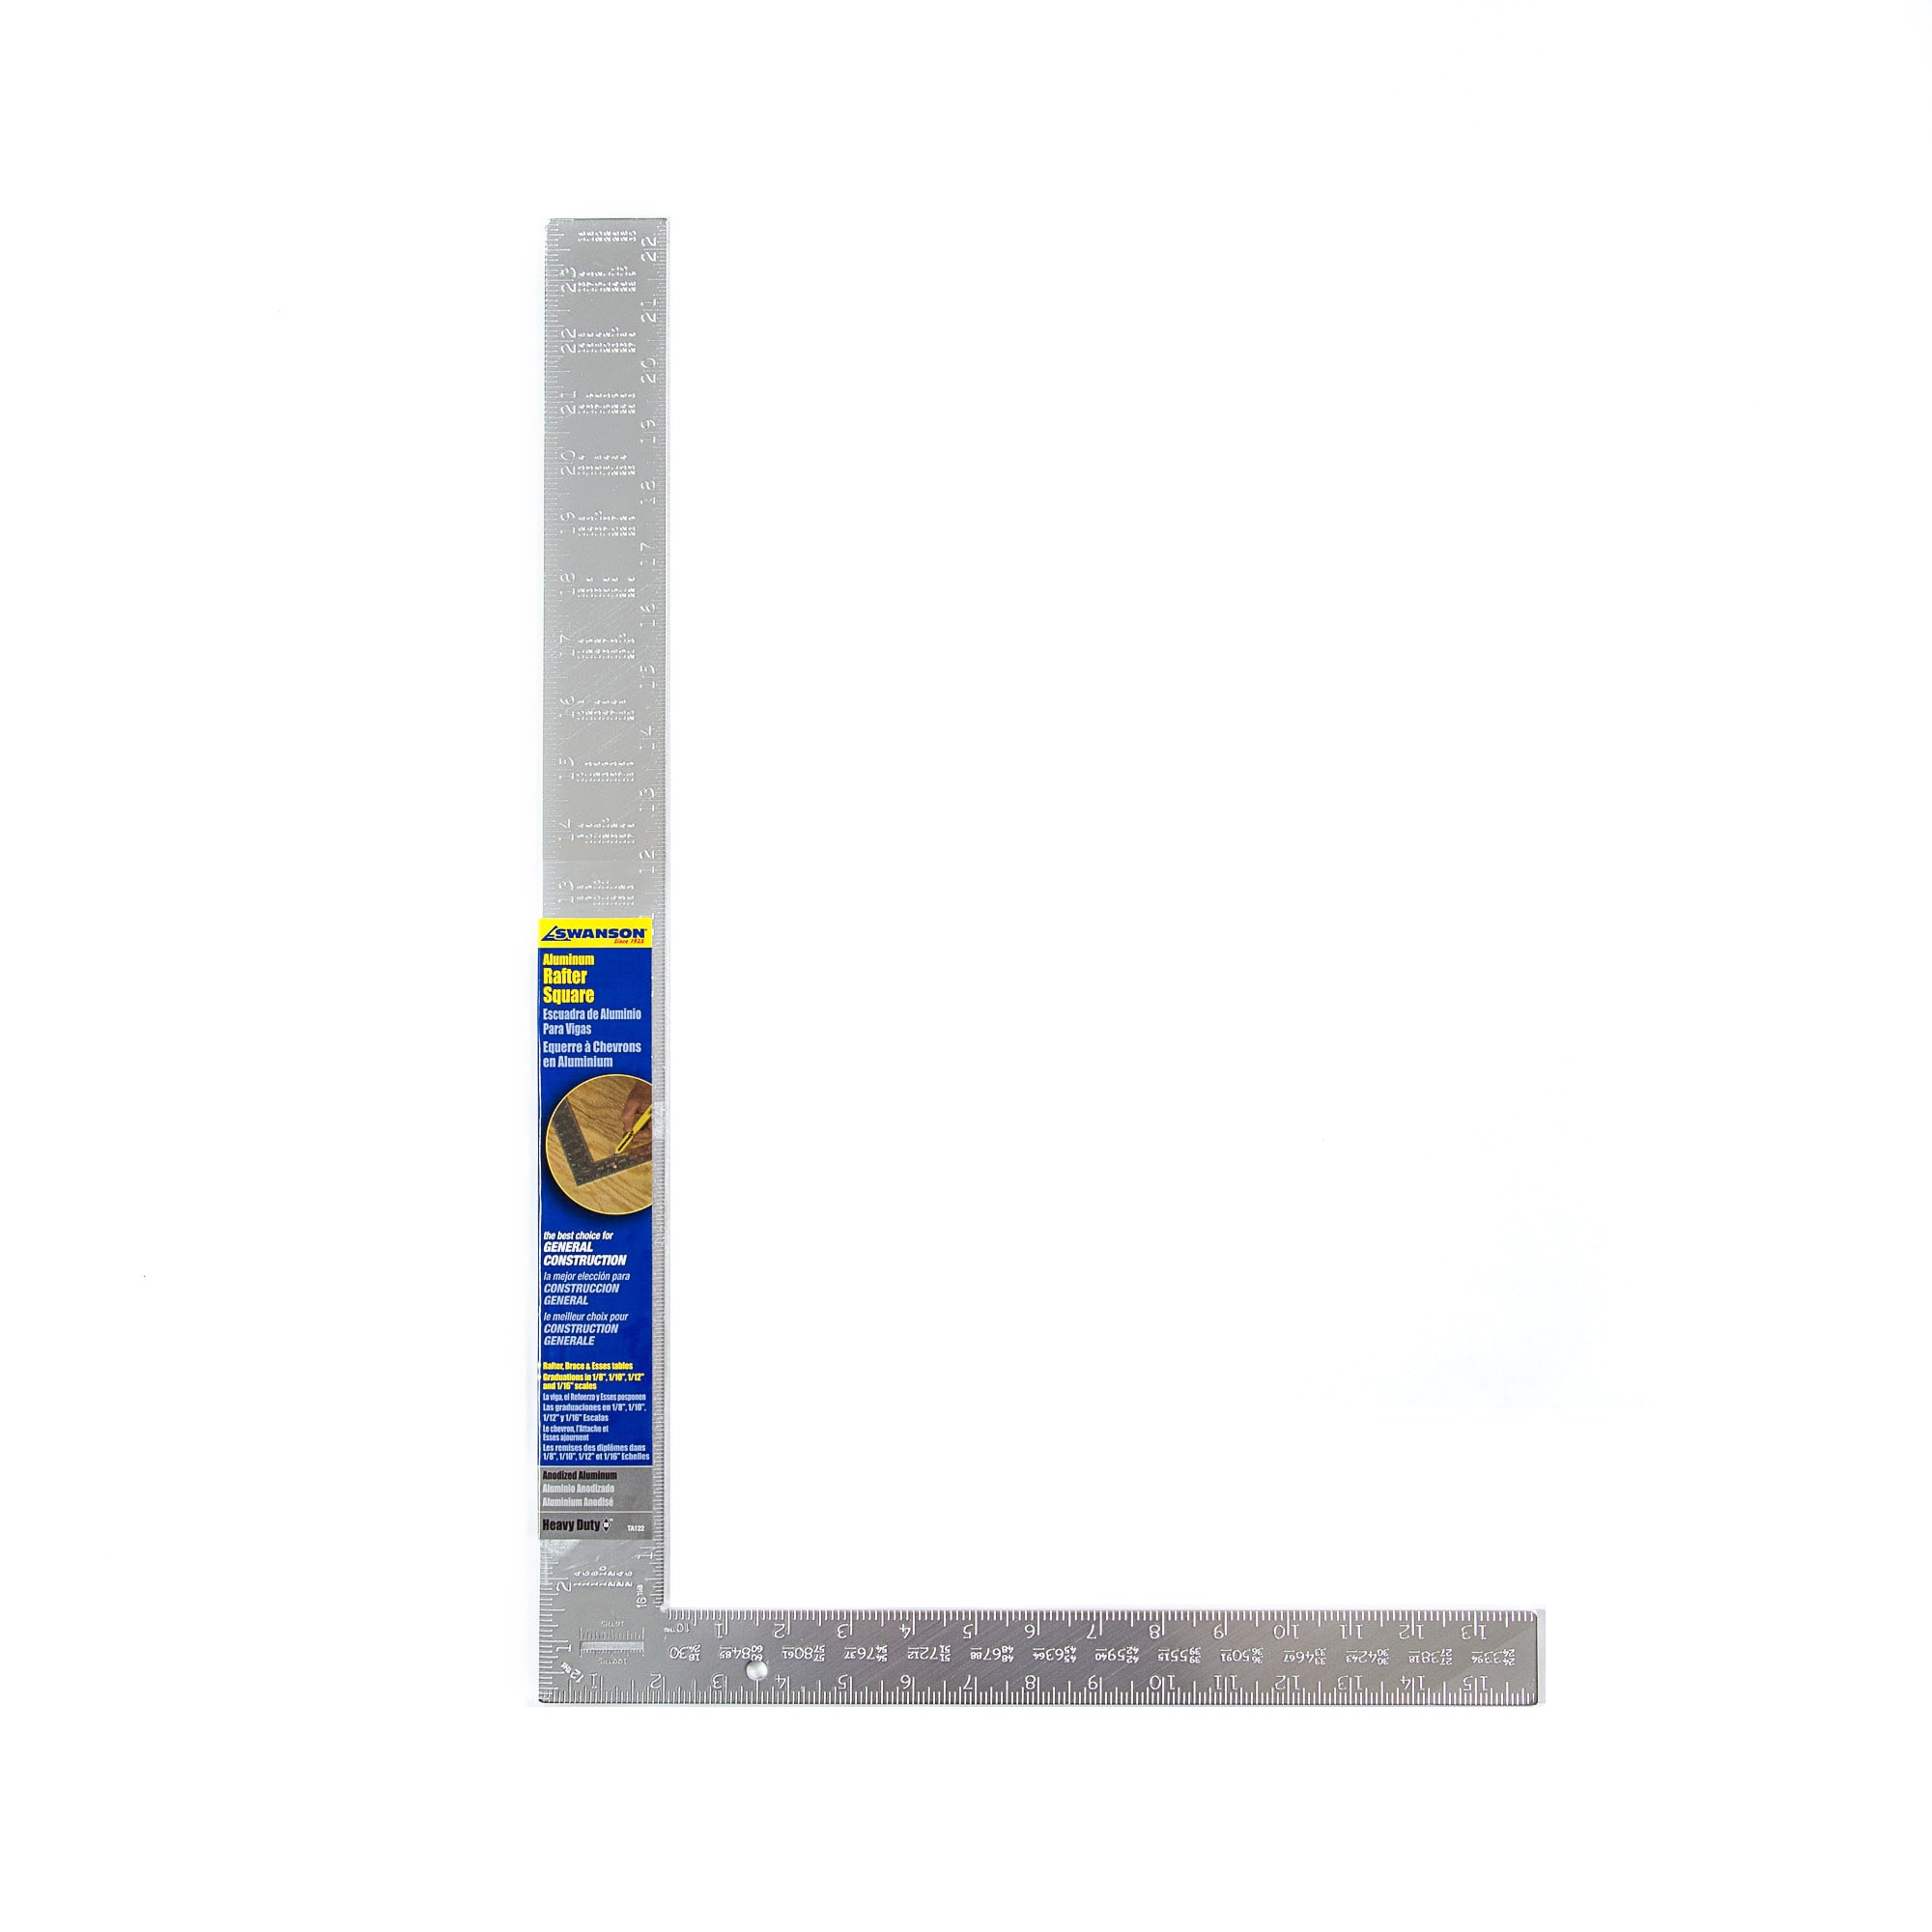 Steel Rulers Thickened Metal Rulers With High Precision Graduation